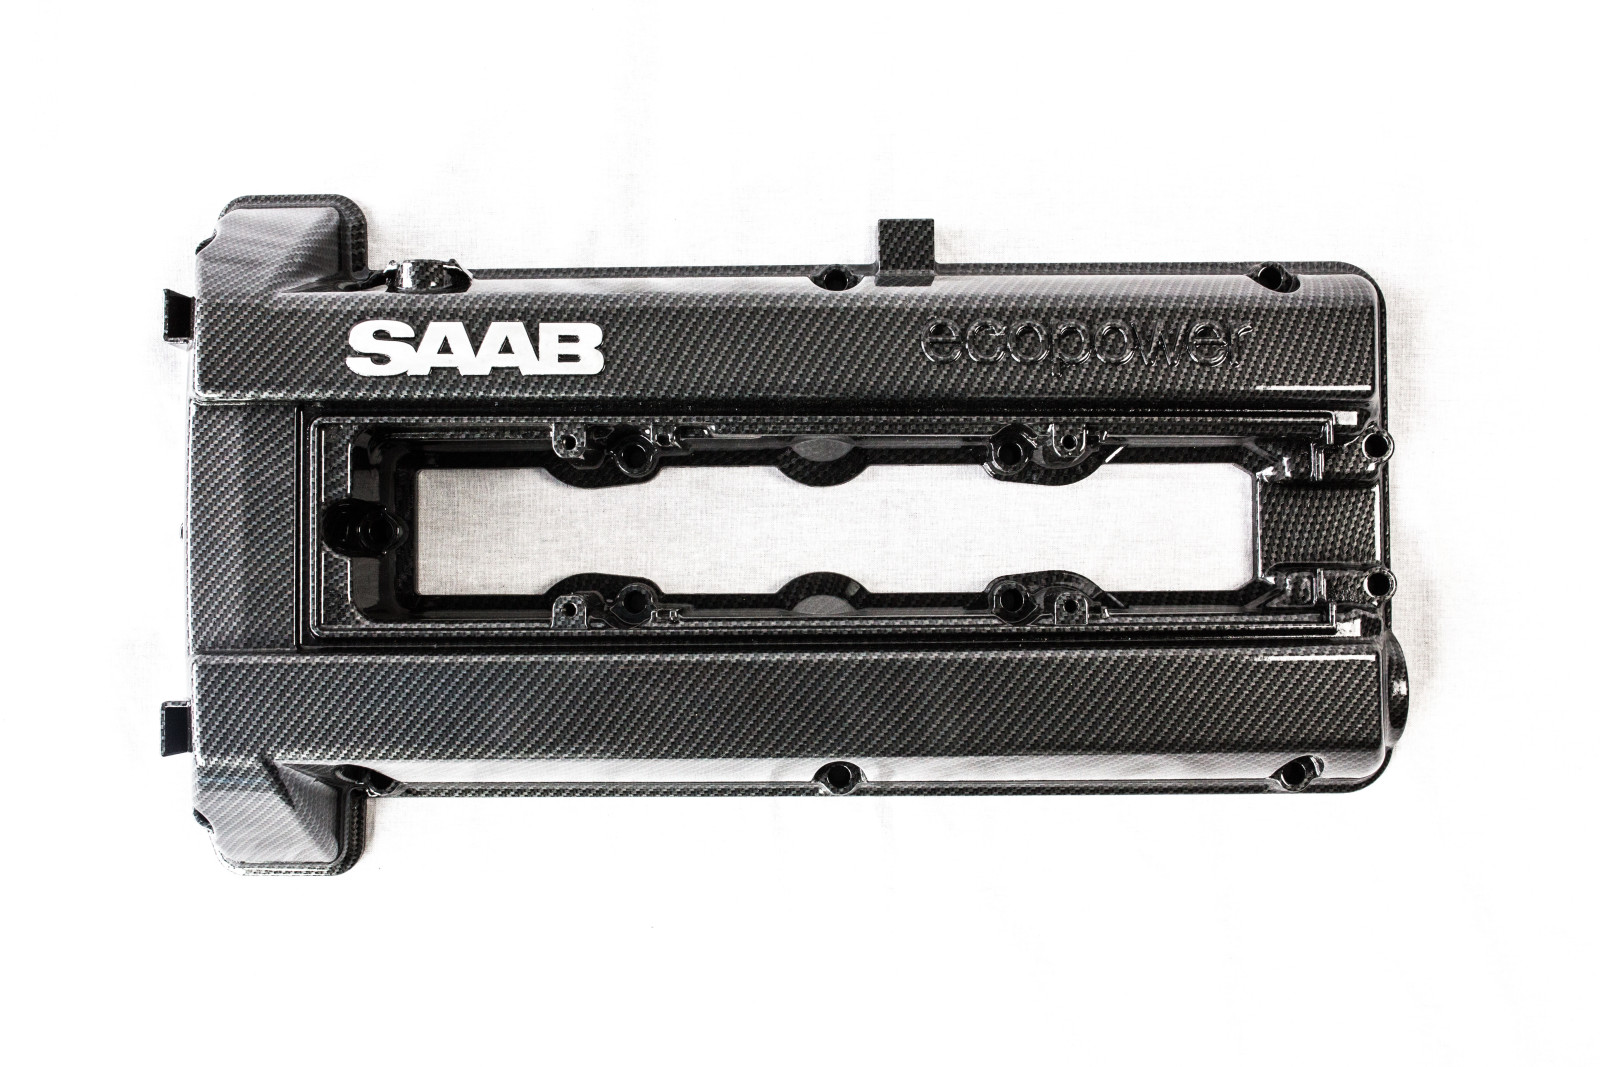 Rocker cover for saab 9.3, 9.5 Carbon type finish